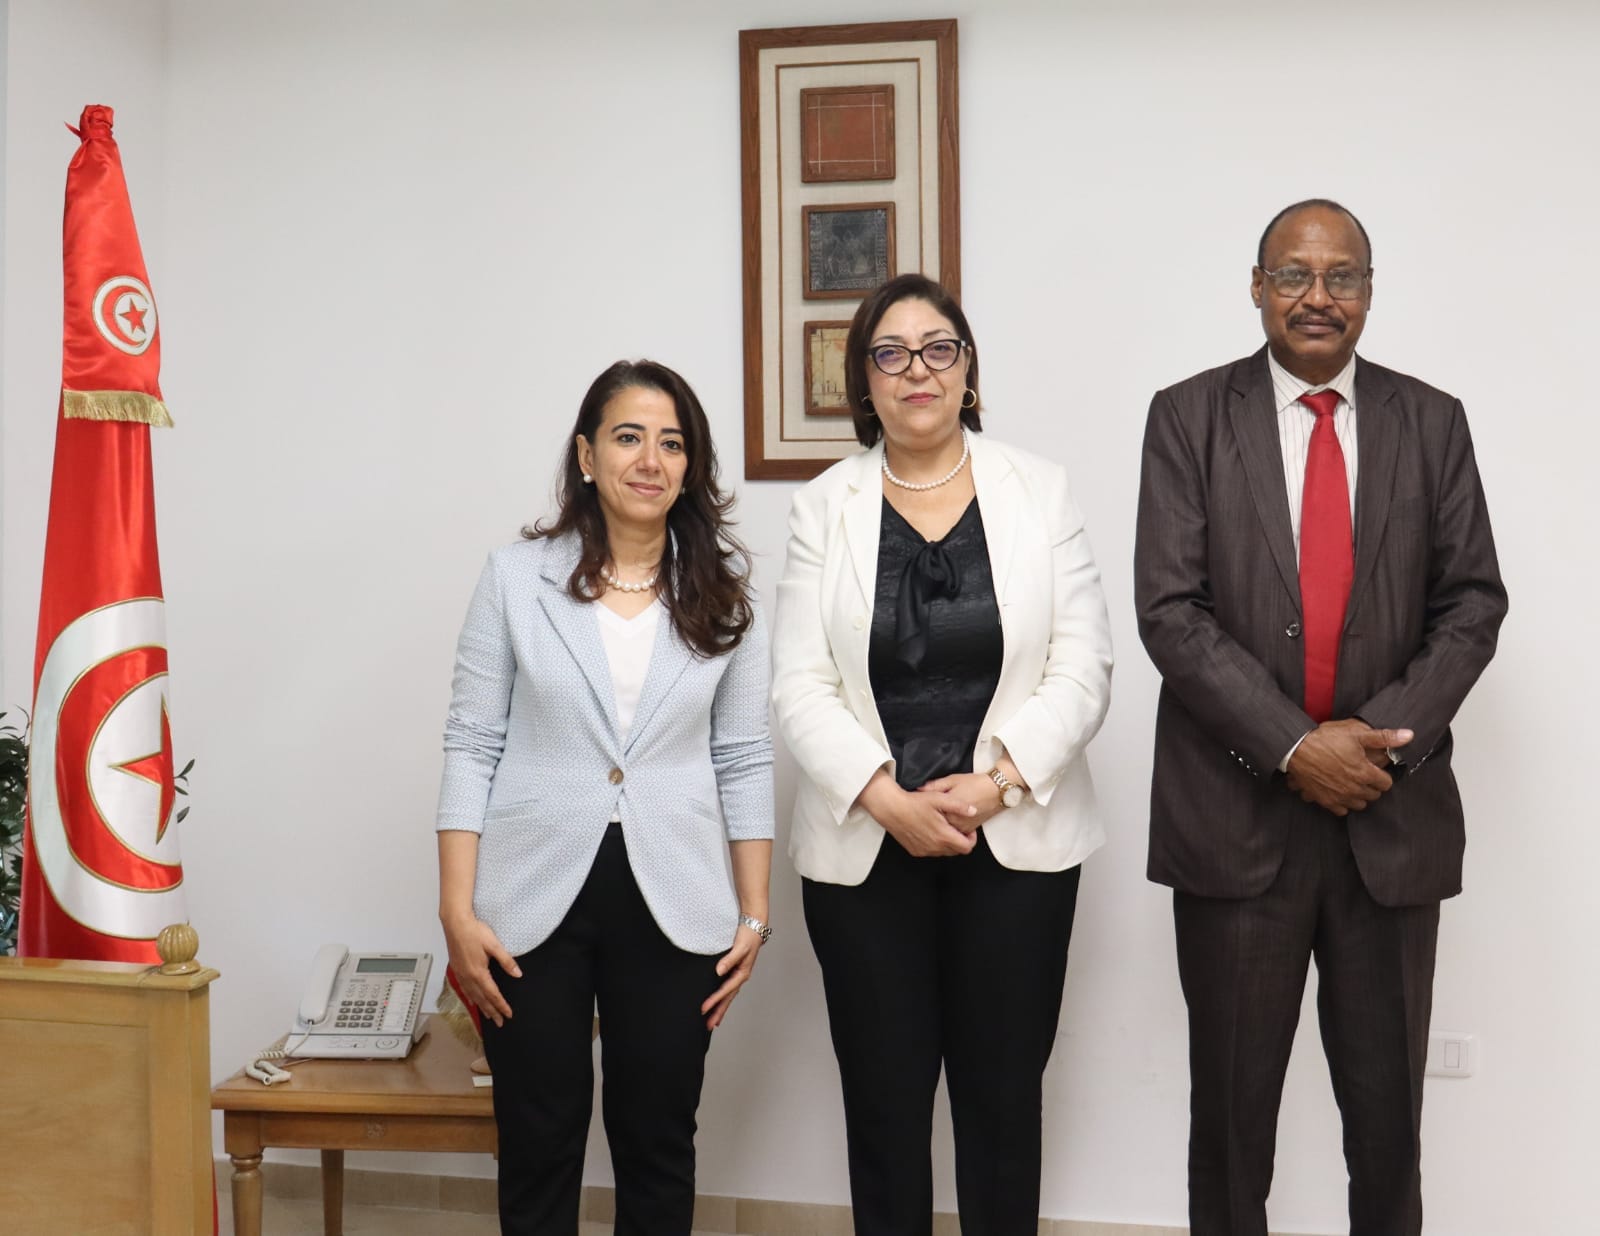 The Tunisian Ministry of Trade discusses with a UN delegation the latest developments in the continental trade corridor project with Libya.